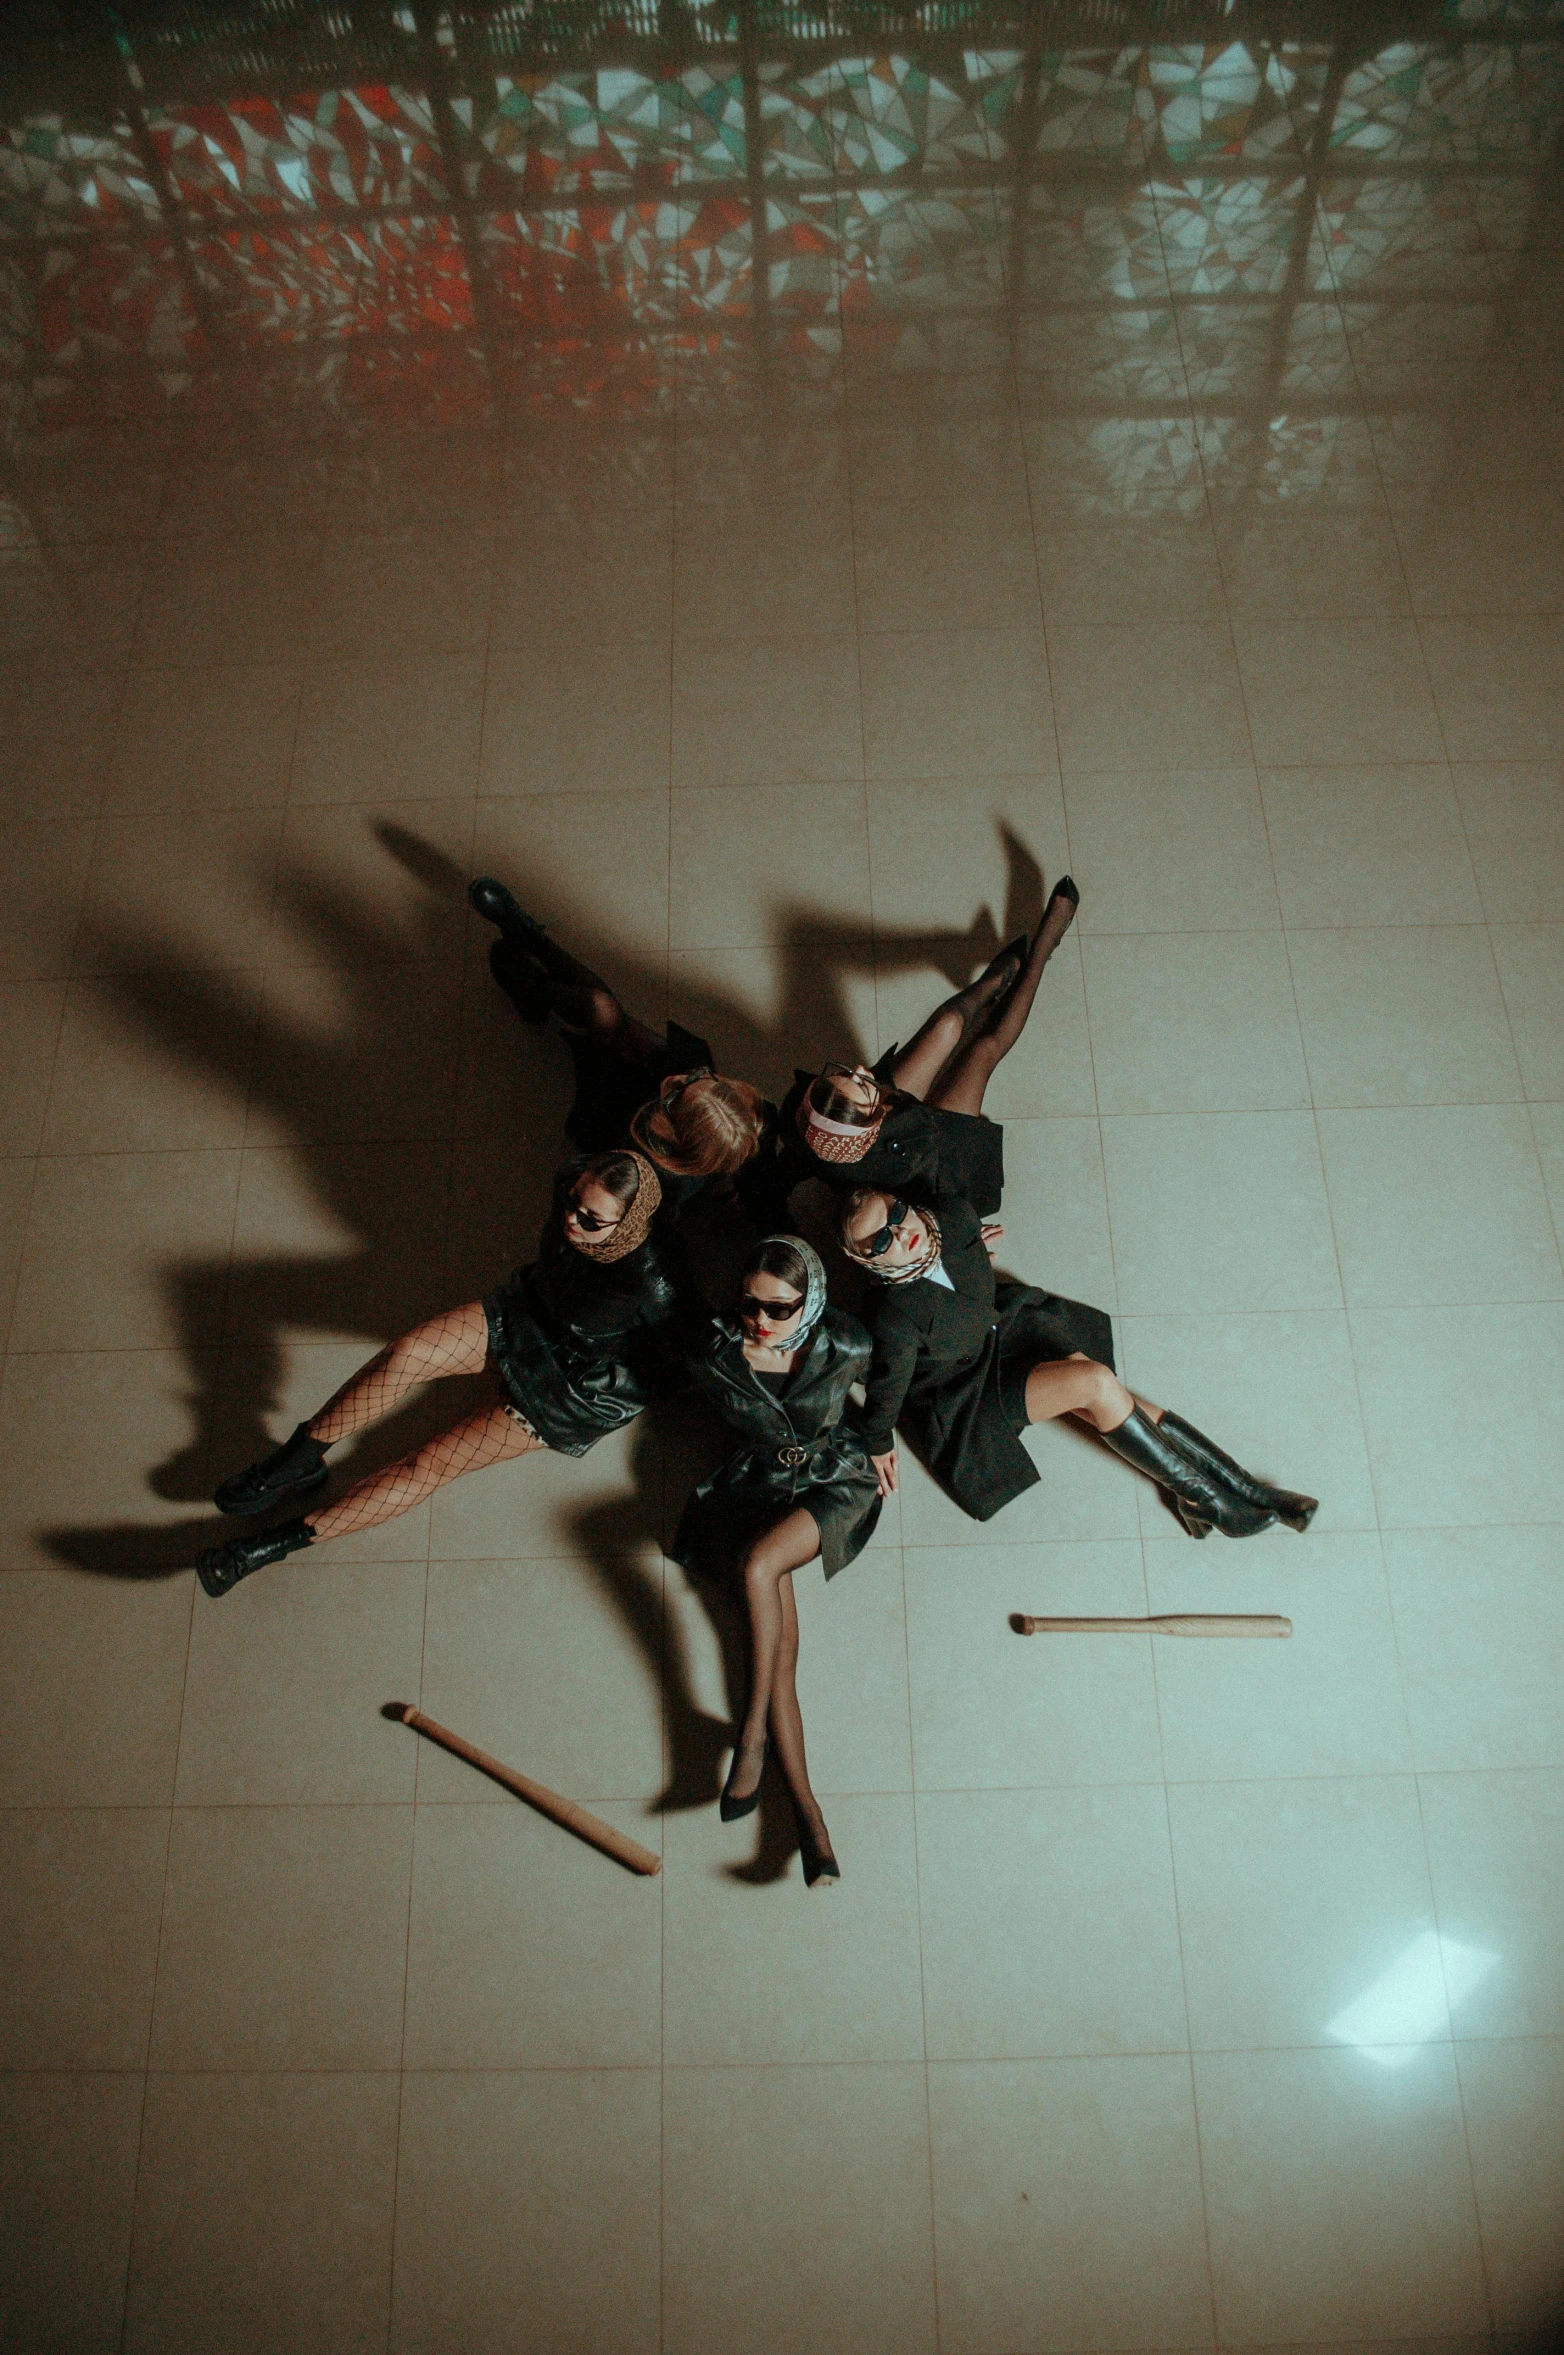 four people pose for a po in the middle of a tile floor